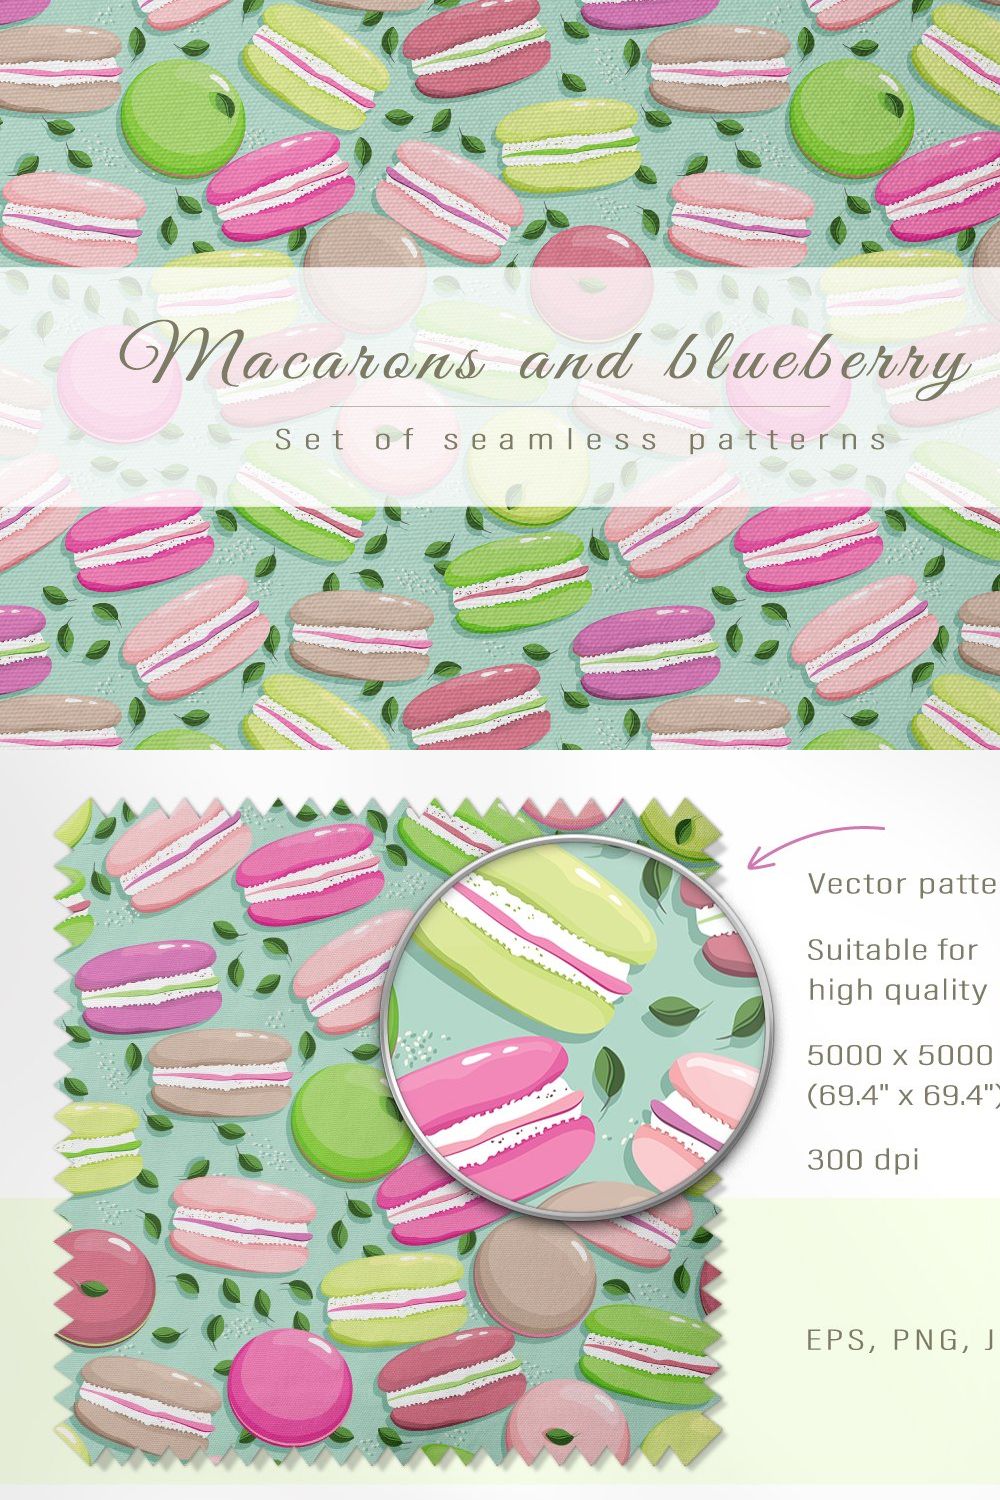 Macarons and blueberry 1 pinterest preview image.